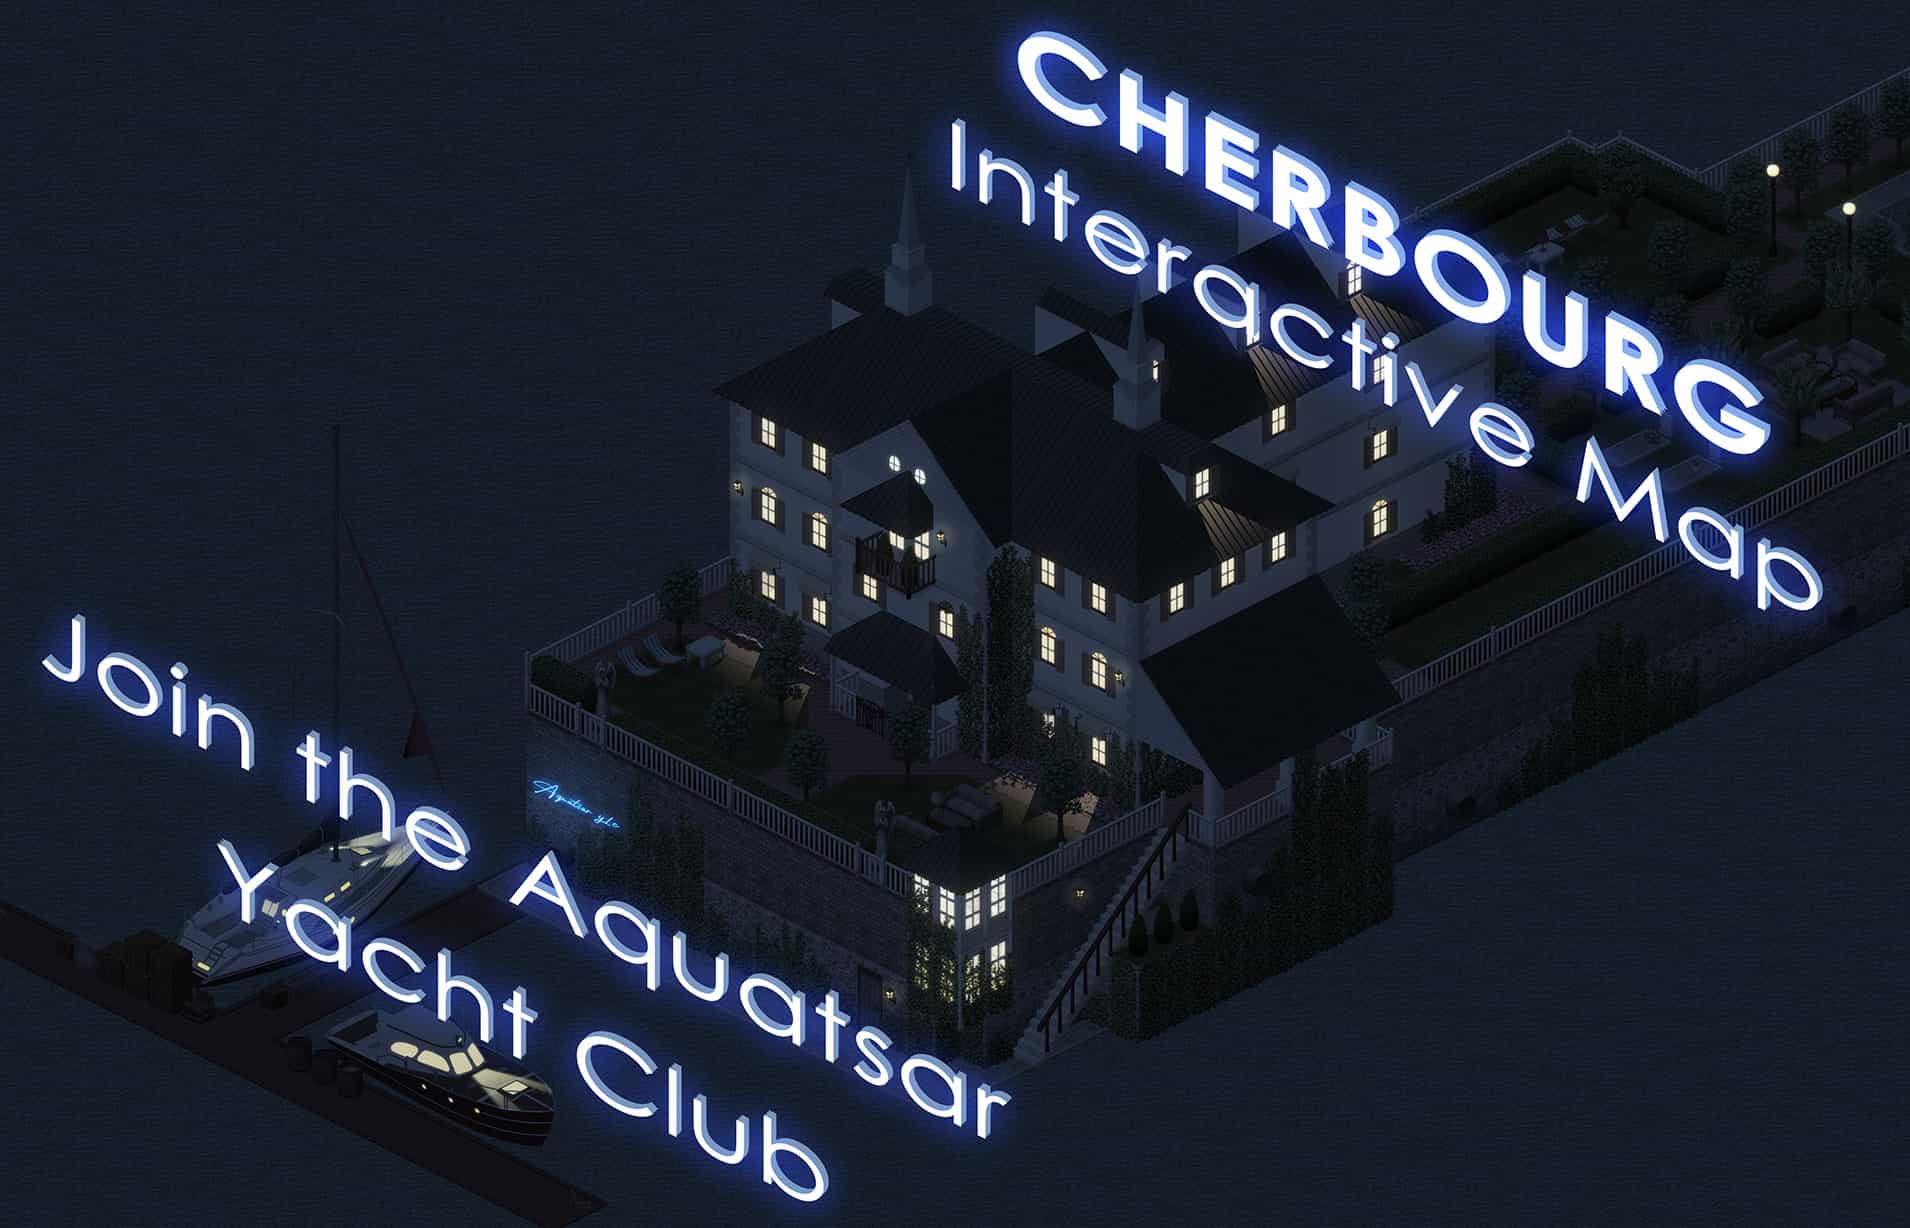 Interactive map of Cherbourg